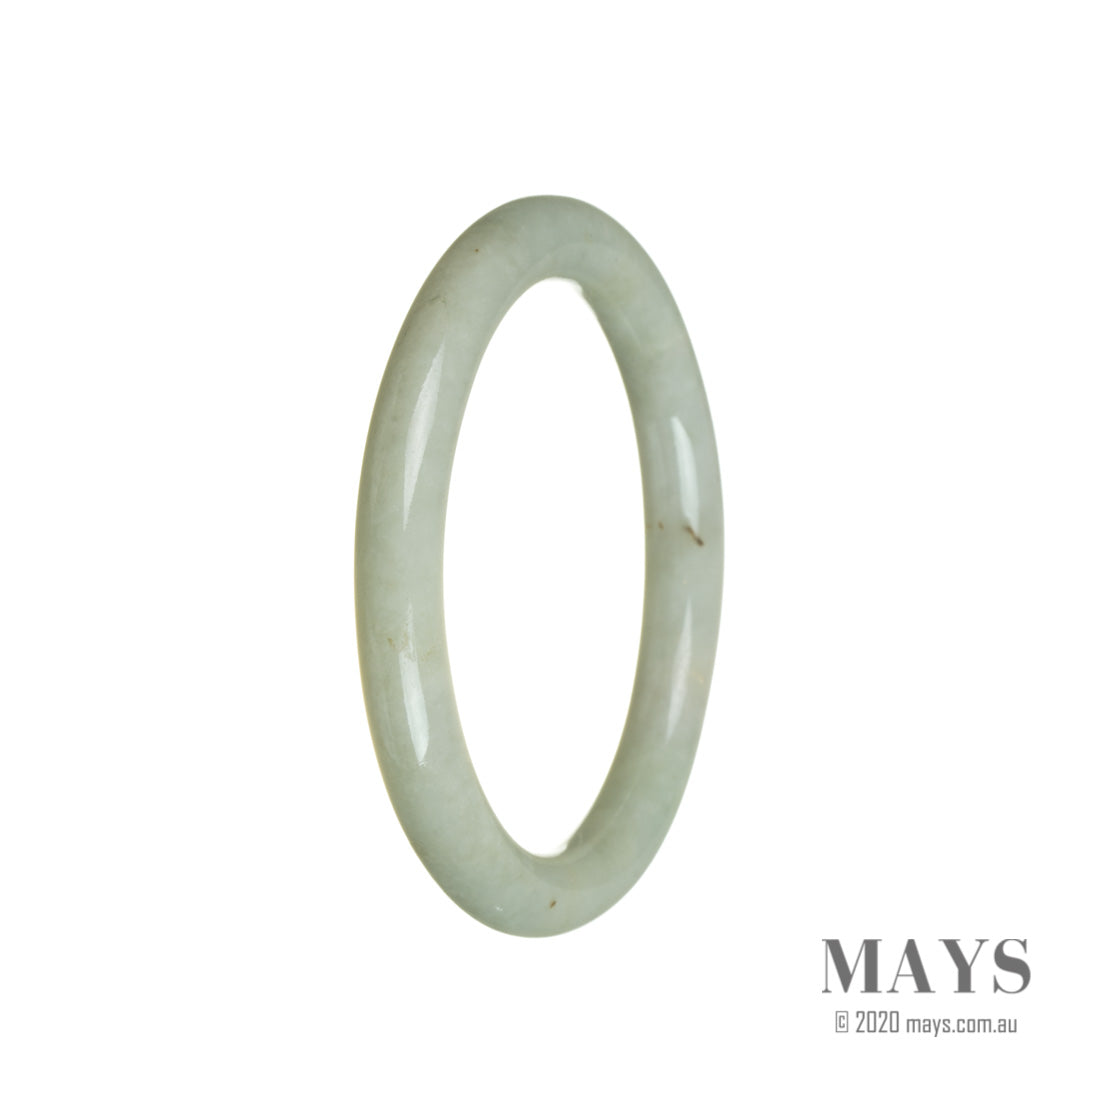 A beautiful pale green jadeite bangle with a real grade A quality. Oval-shaped and measuring 58mm in diameter. Designed by MAYS™.